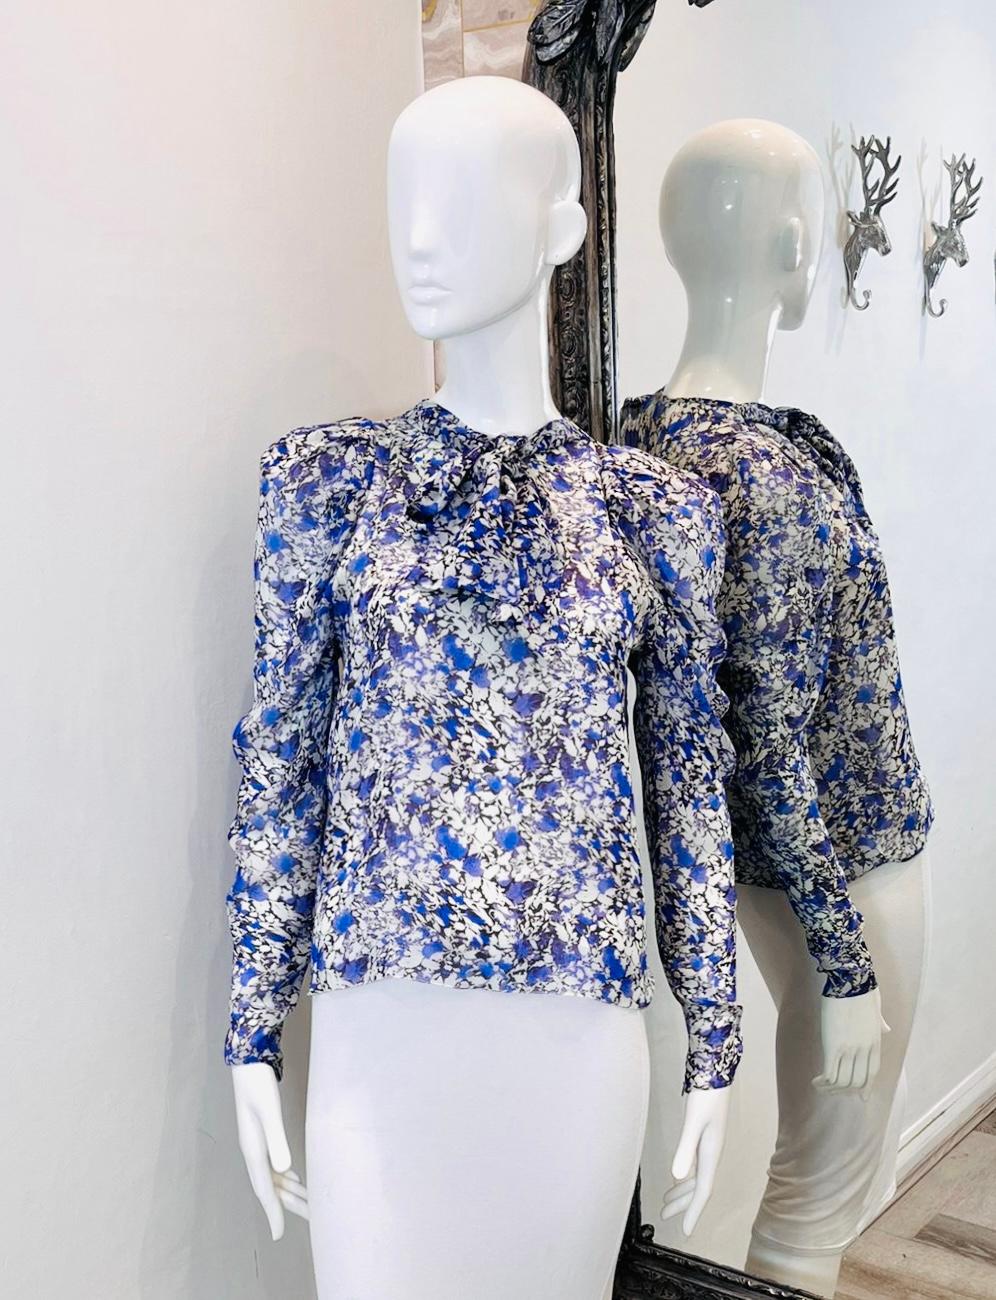 Giambattista Valli Silk Tie-Neck Floral Top

Long sleeved blouse detailed with tiny white and purple floral design.

Featuring tie-neckline, gathered accent to the shoulders and concealed zip fastening to rear.

Size – 38IT

Condition –